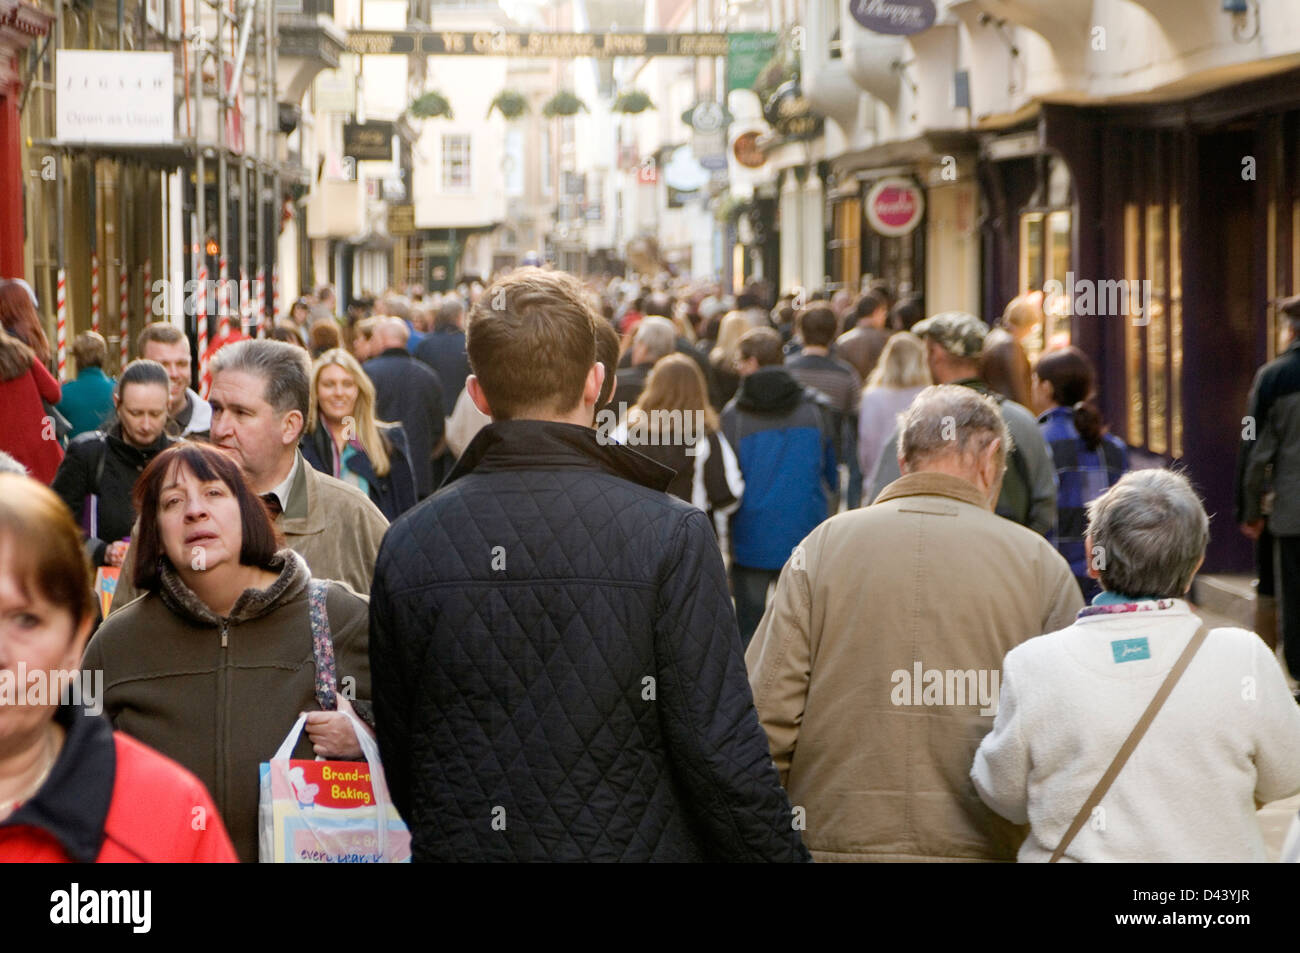 york uk high street busy shoppers shopping retail retailer sale sales index people shop shops bustling streets packed highstreet Stock Photo